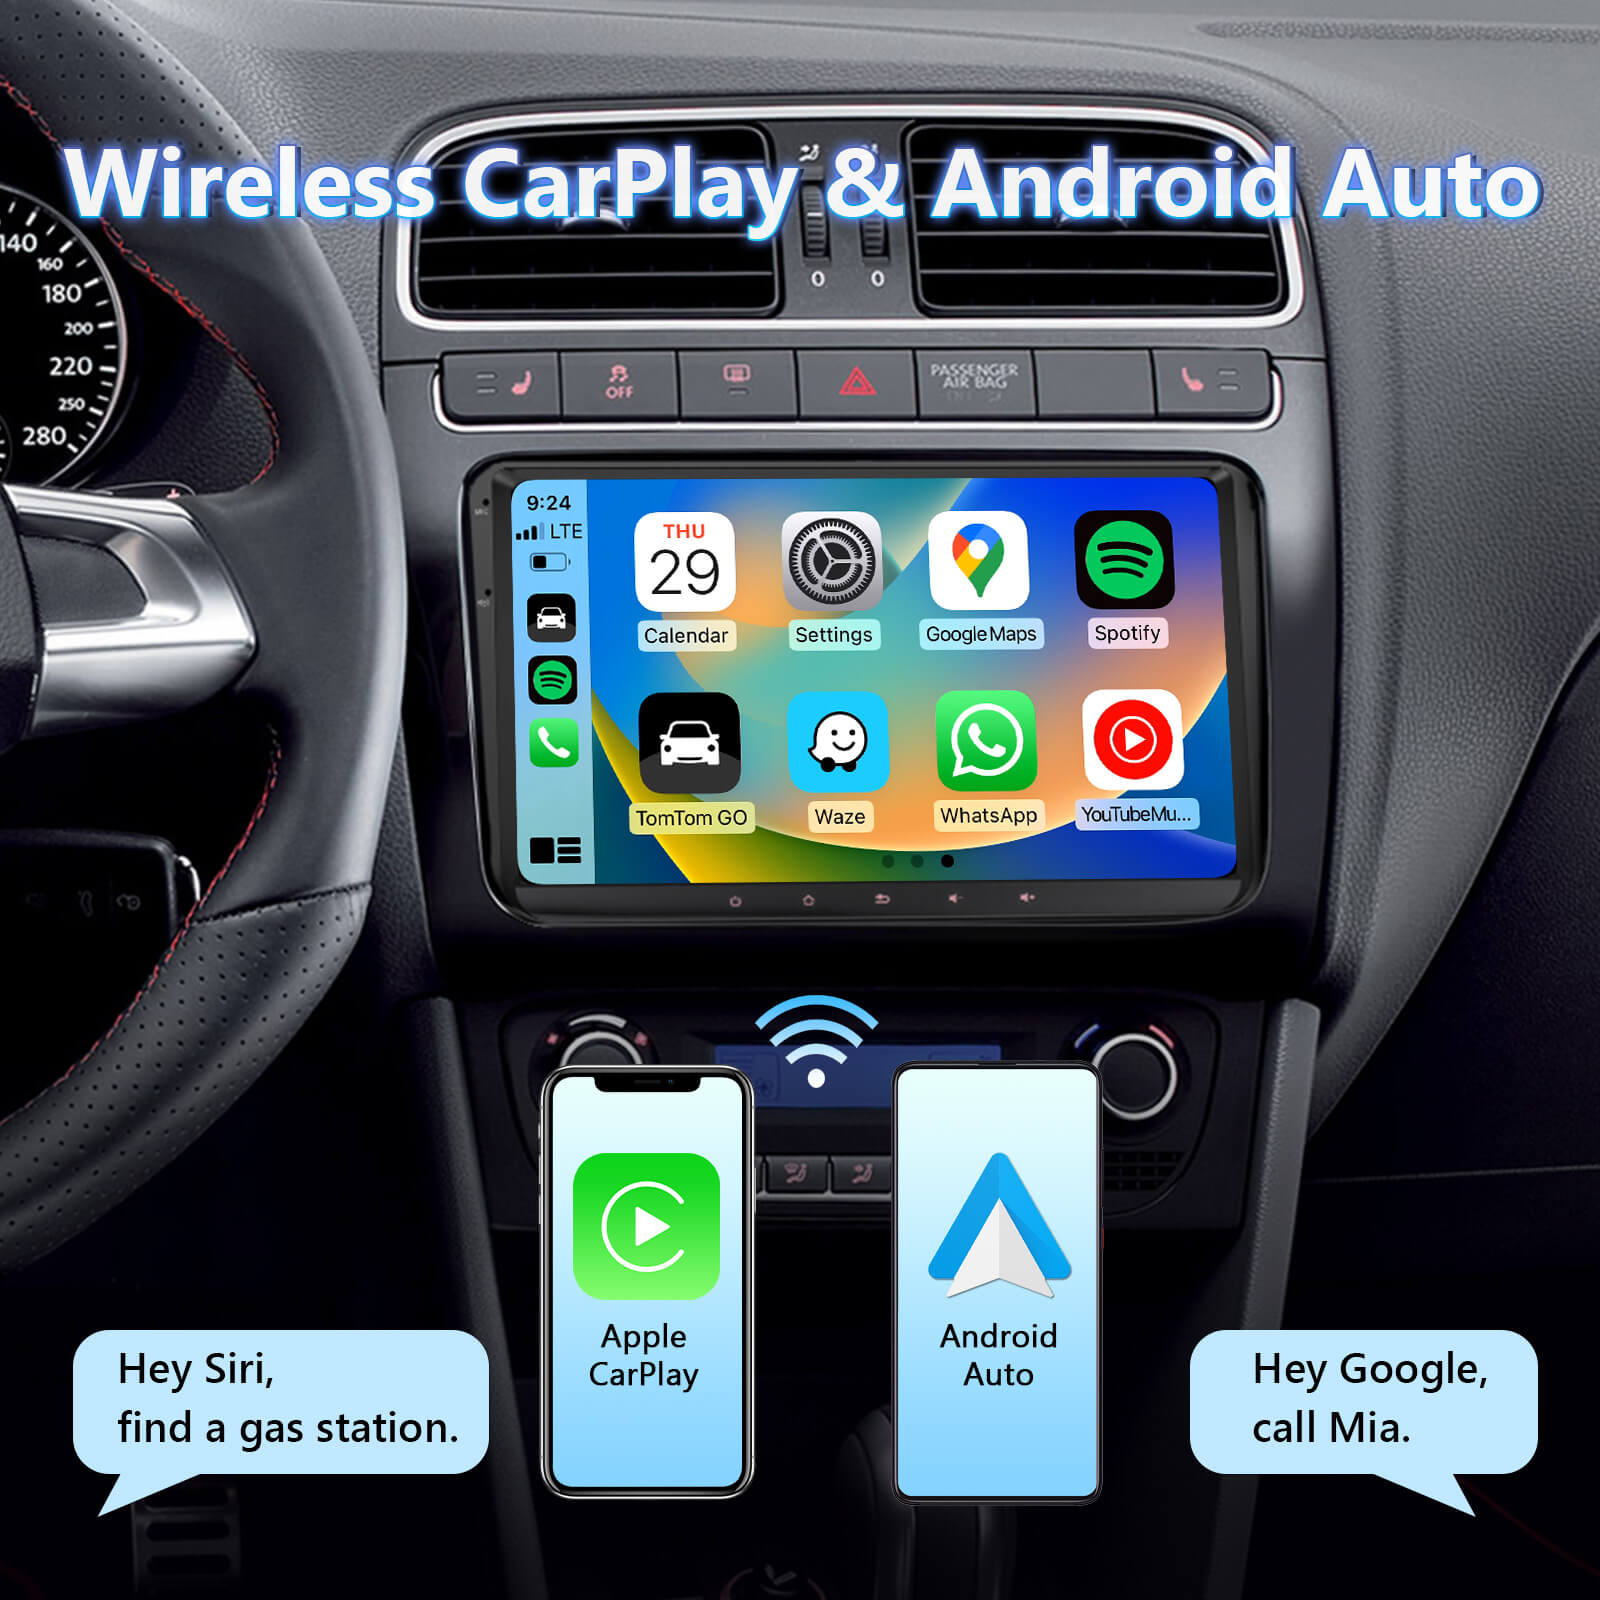 Eonon VW/SEAT/Skoda Android 10 Car Stereo with 8-core Processor 32GB ROM & 9 Inch IPS Display